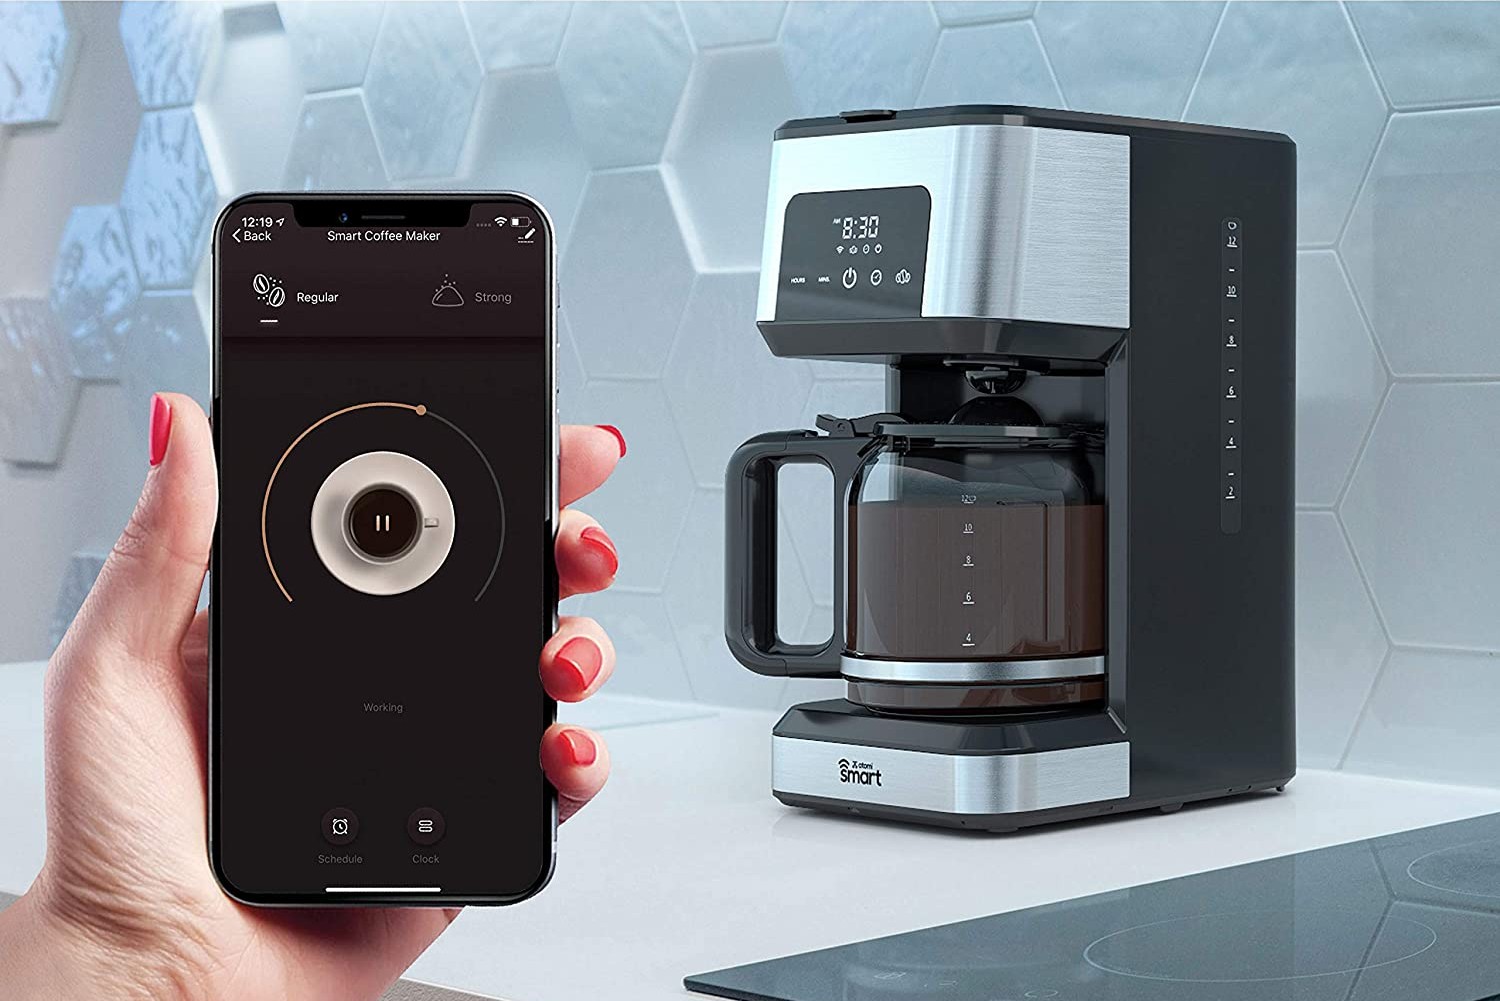 The Best Smart Coffee Maker - 4 reasons to upgrade your Coffee Maker